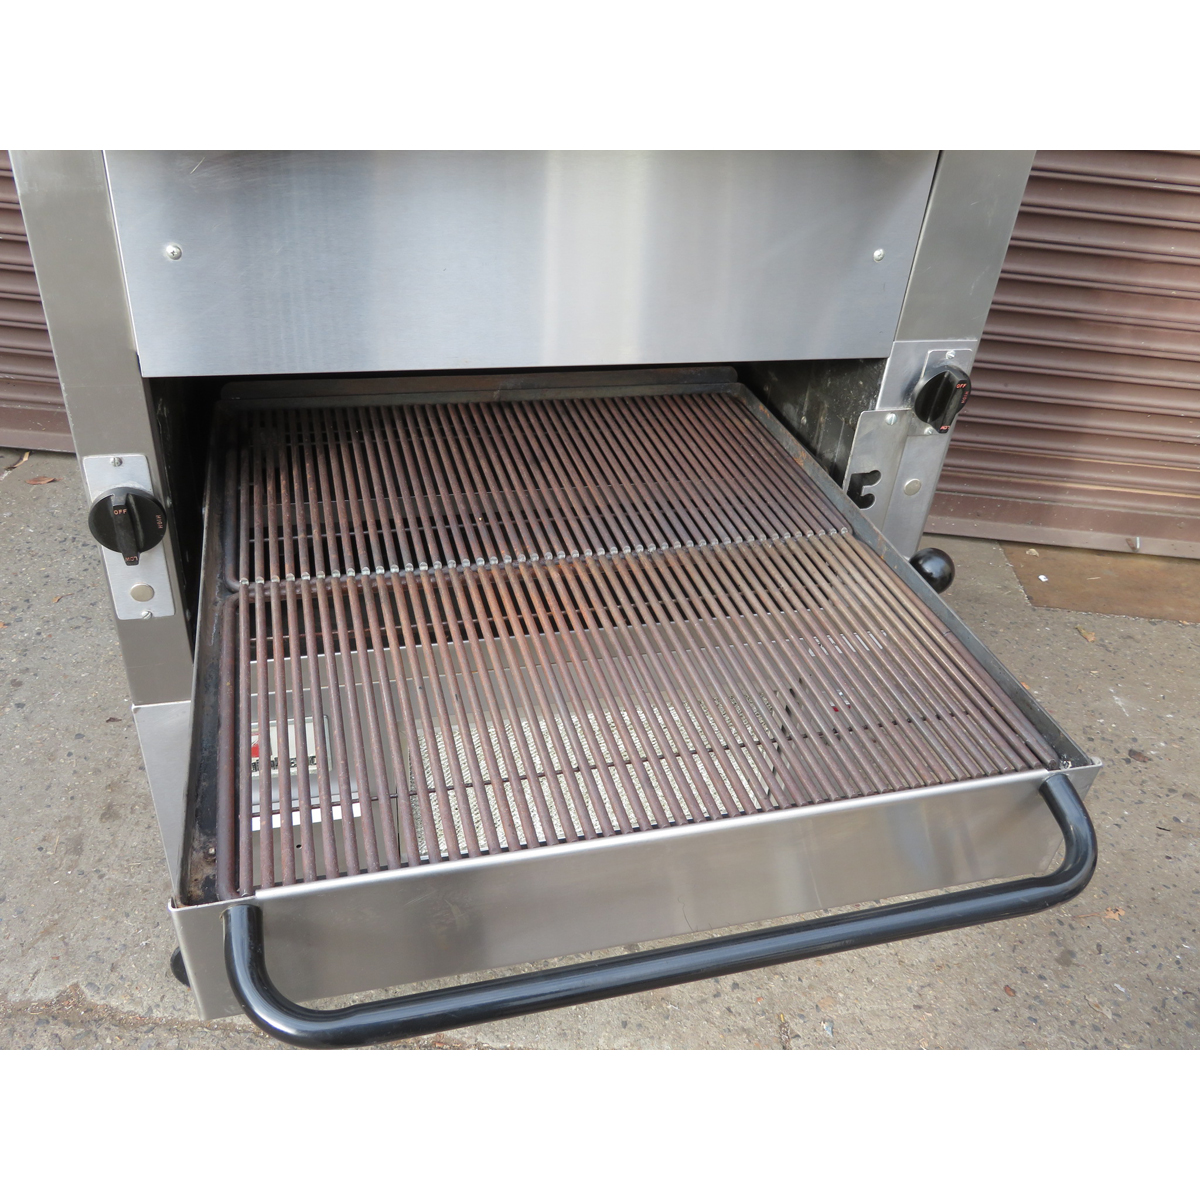 Southbend 270D-4 Two Deck Infrared Broiler, Used Excellent Condition image 1